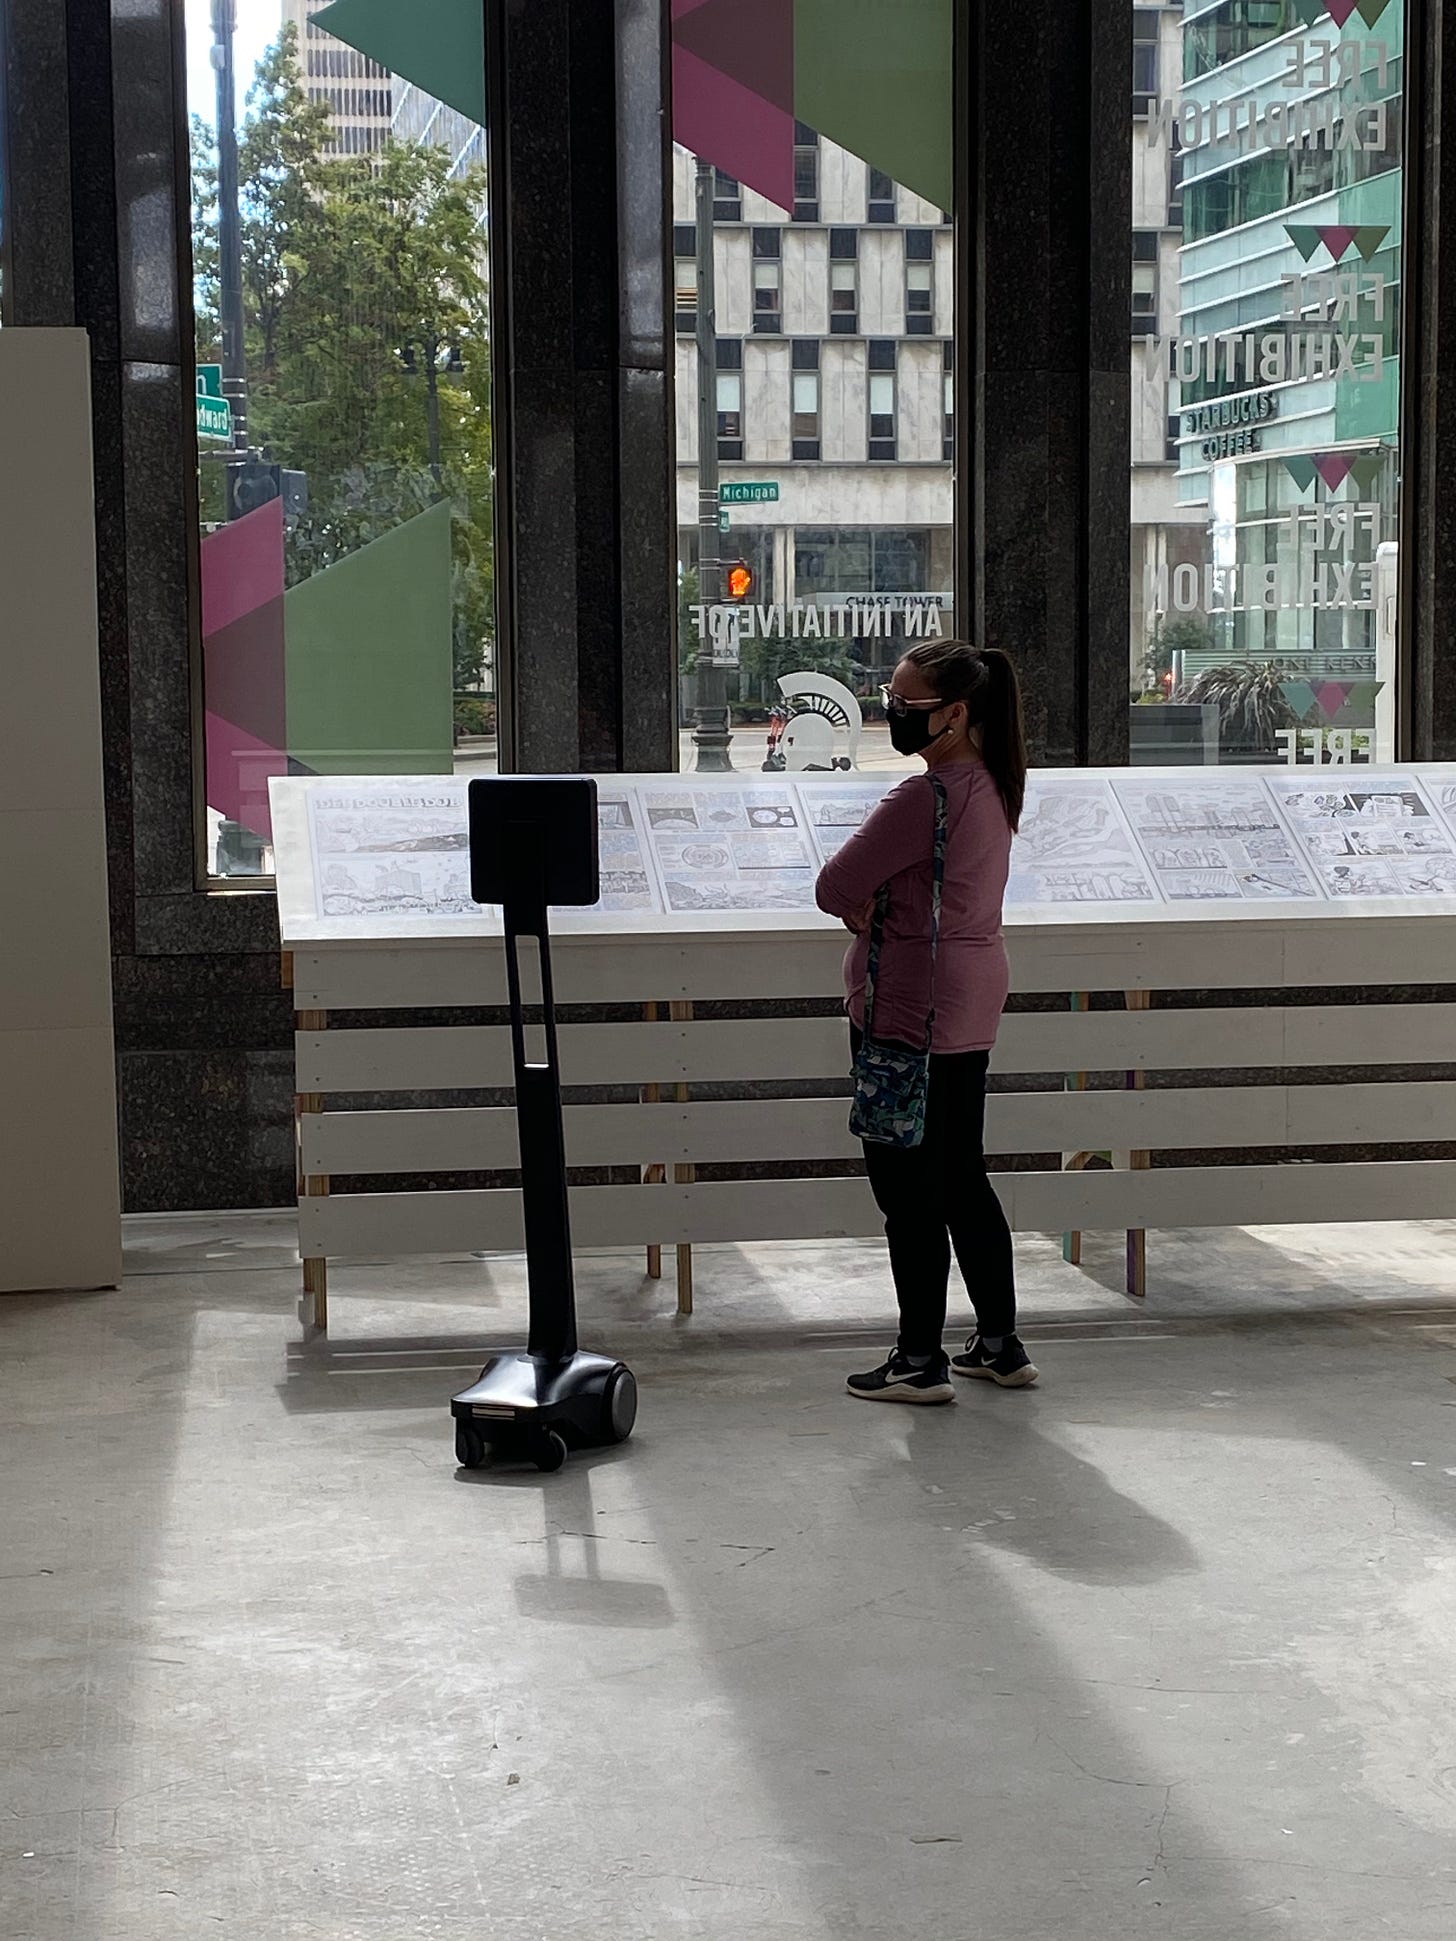 A visitor interacting with a telepresence robot in the Future Present exhibition.